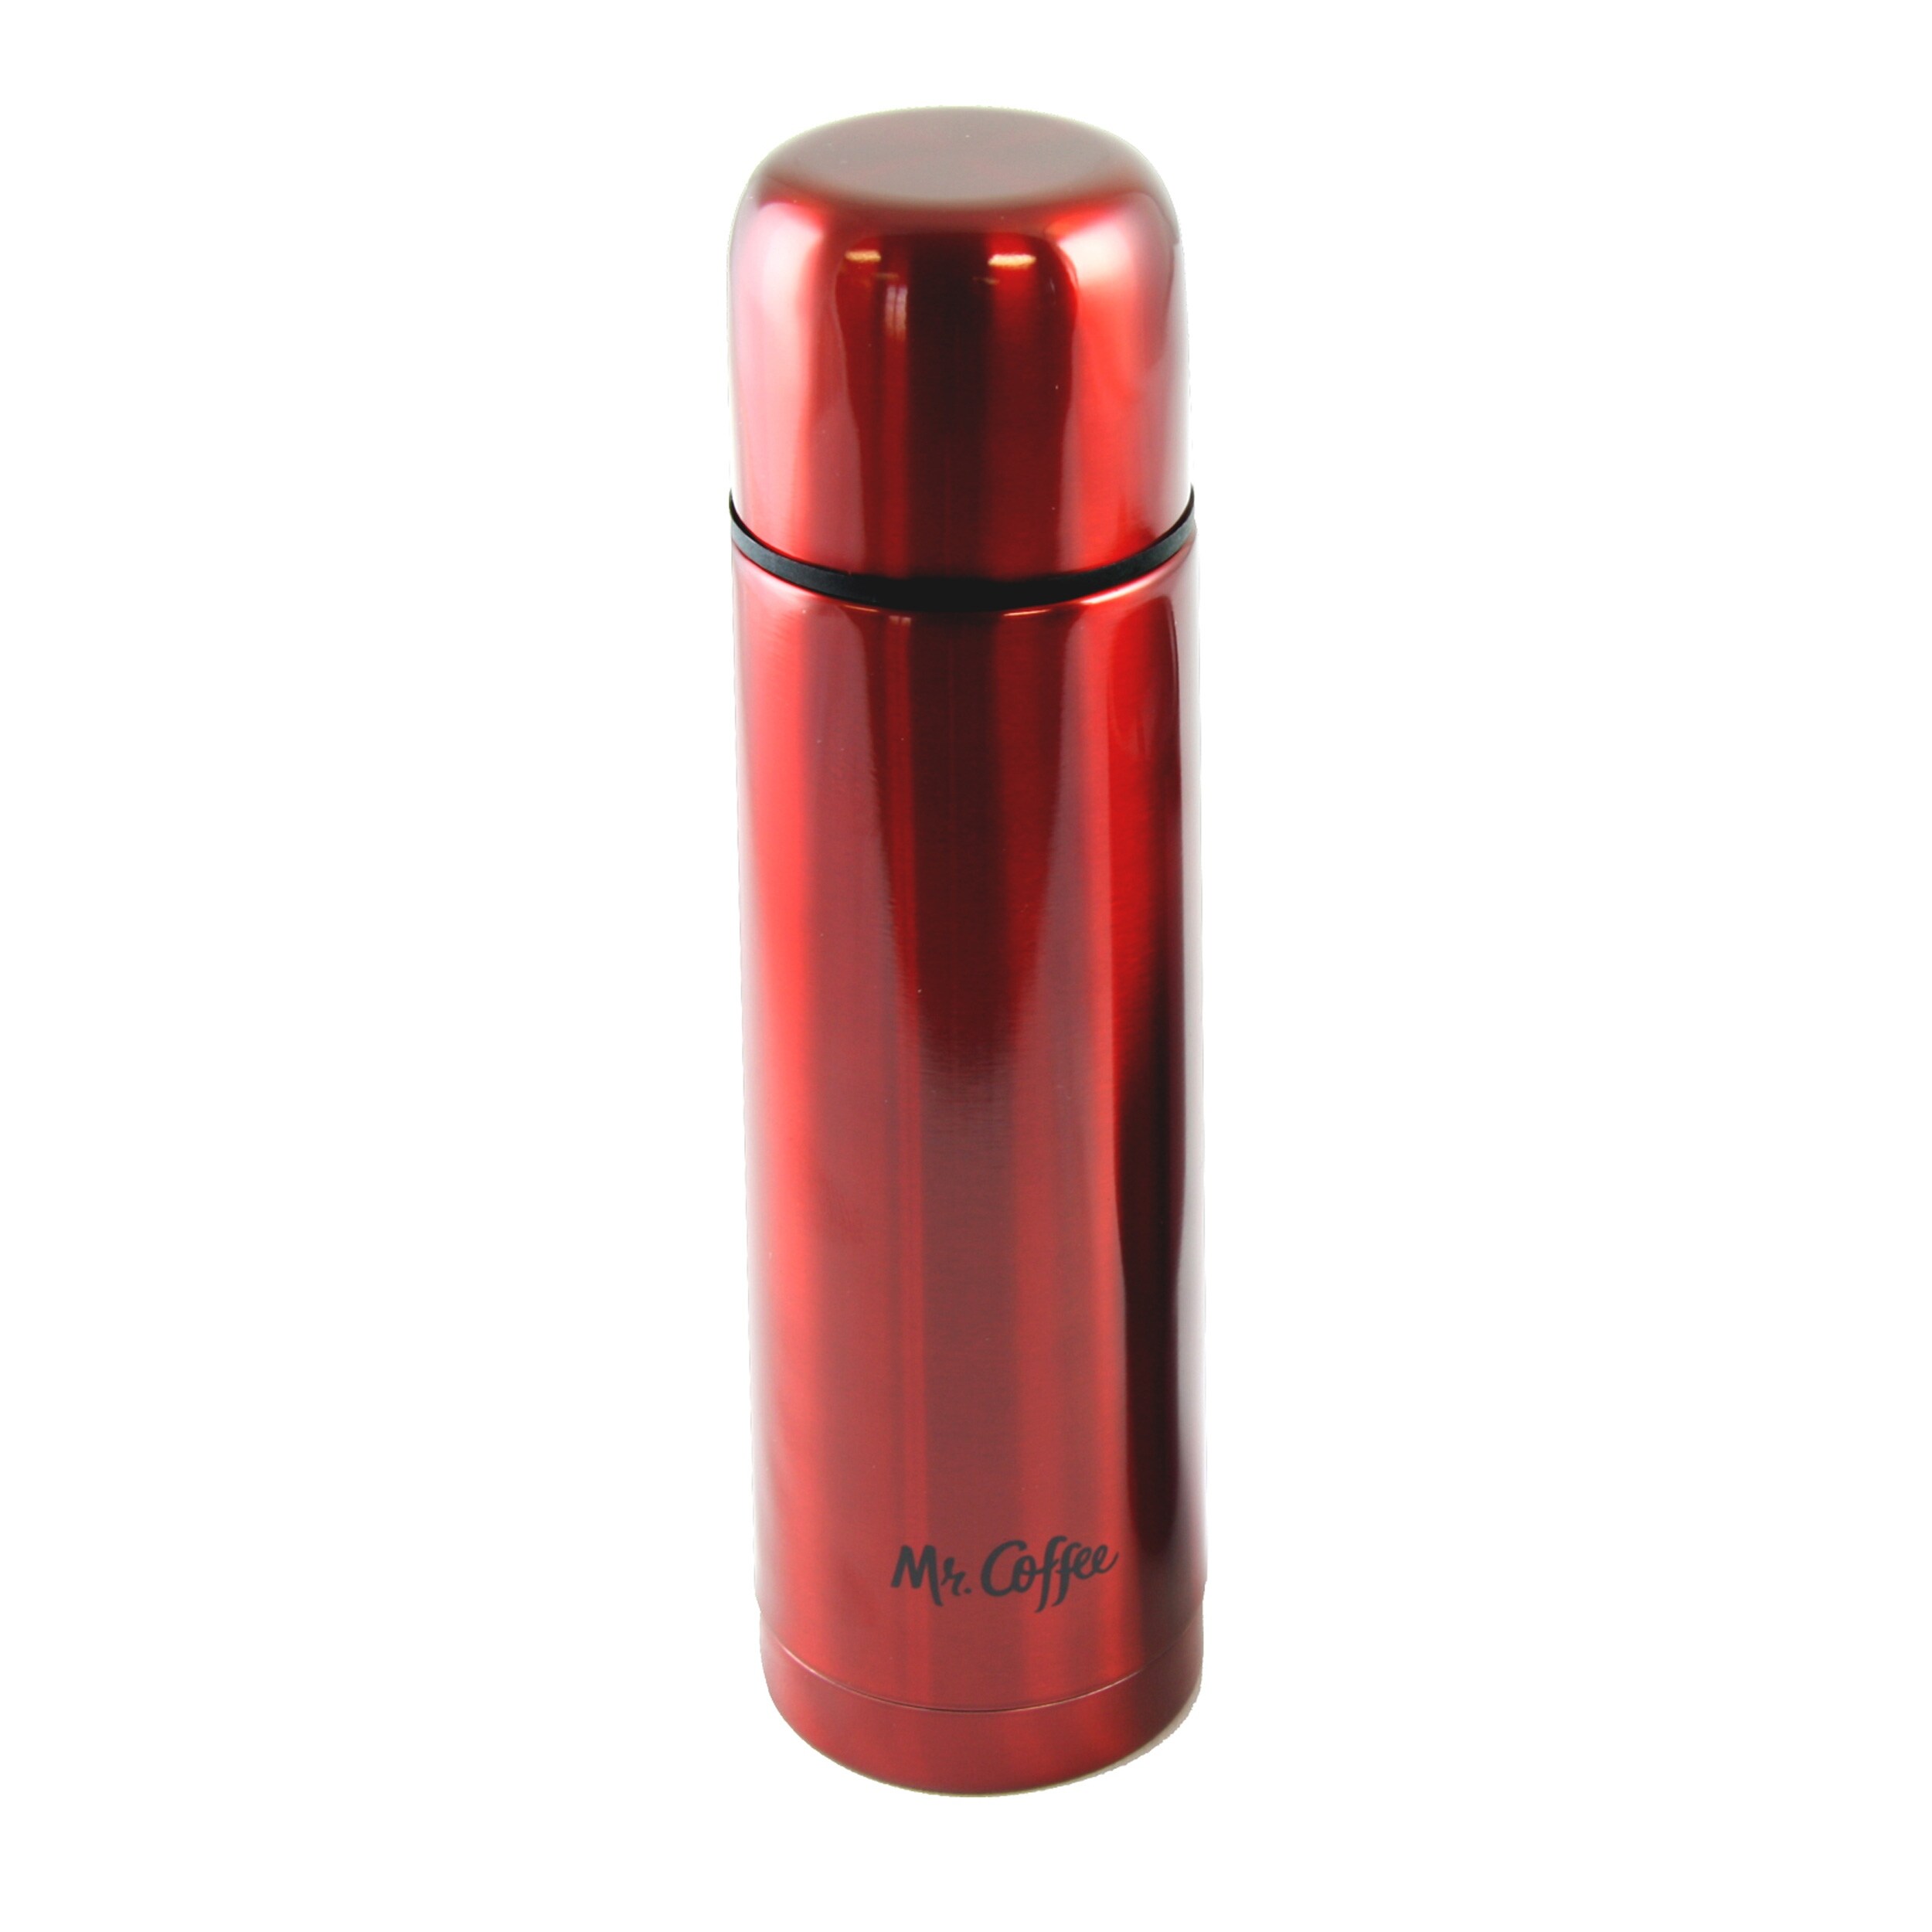 https://ak1.ostkcdn.com/images/products/is/images/direct/299cc4383209762847e7eb9f2574c1549f9c07b3/2-Piece-Red-Thermos-and-Travel-Mug-Set.jpg